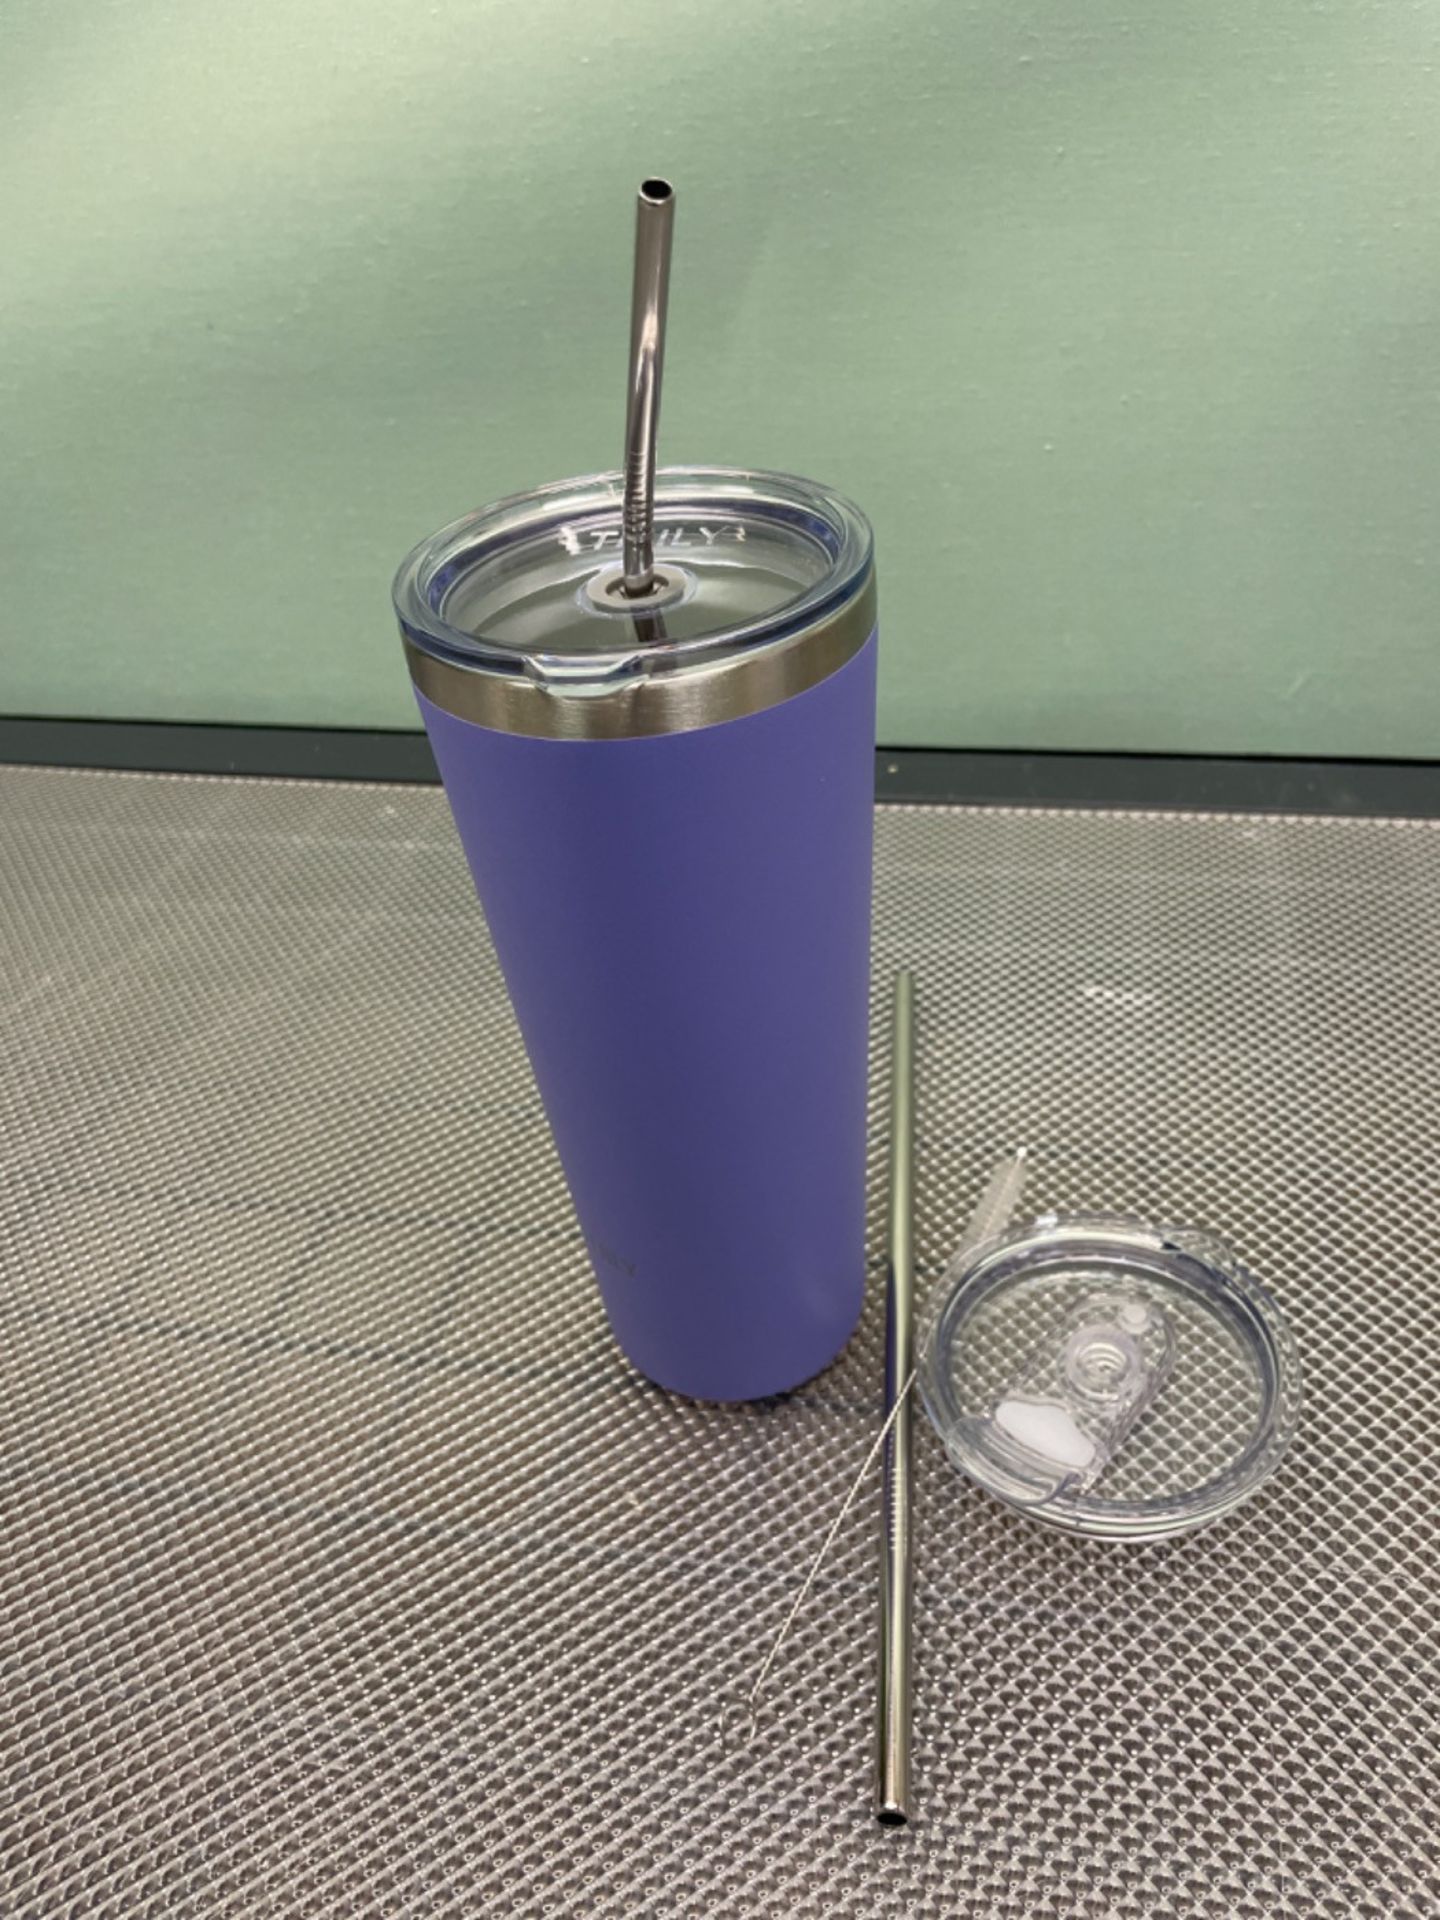 THILY Tumbler Stainless Steel Travel Mug 780 ml Triple-Insulated Coffee Cup with 2 Lids and Straws, - Image 3 of 3